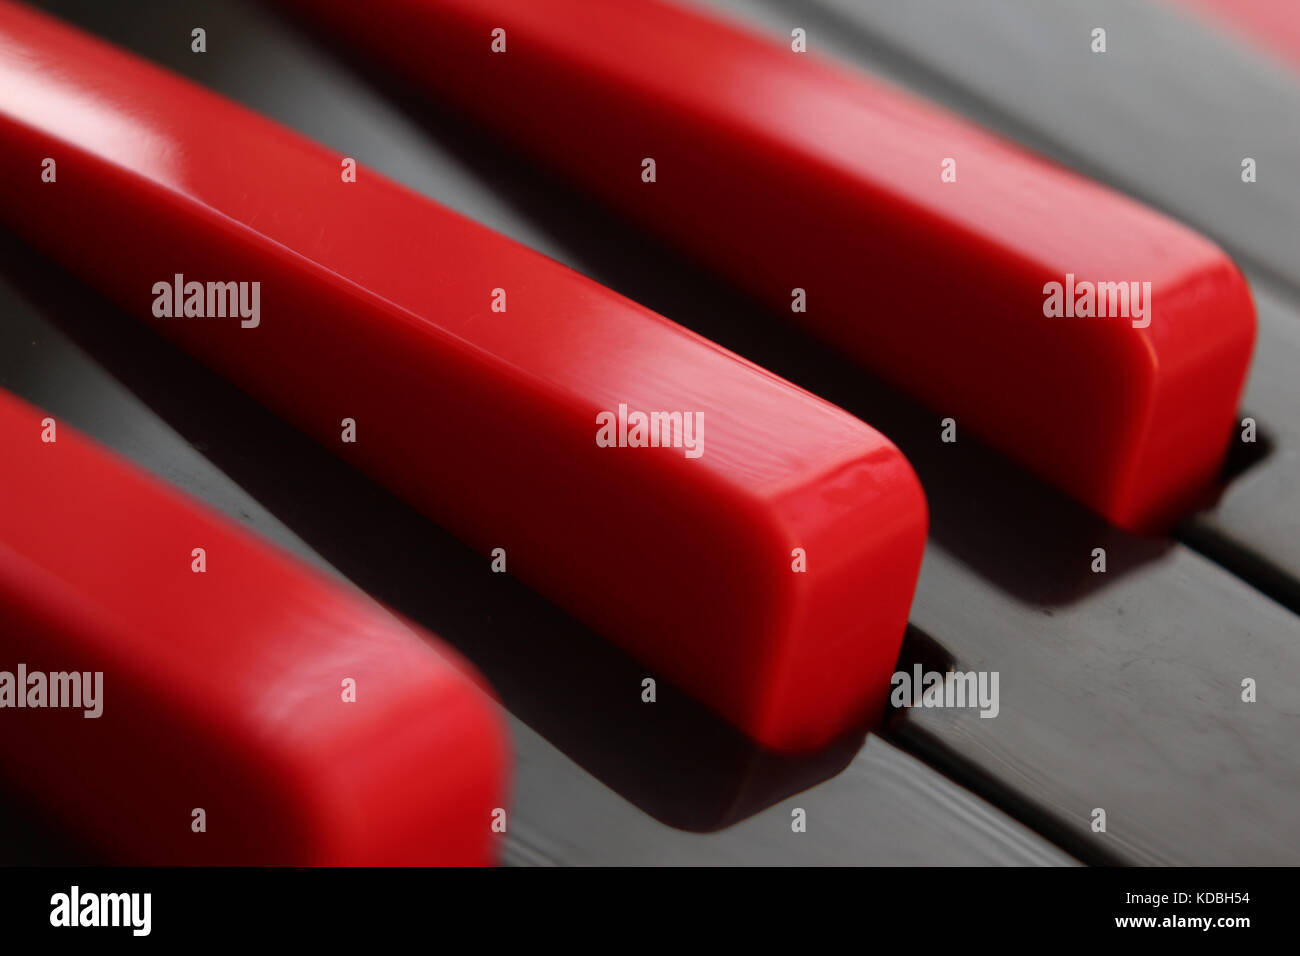 Closeup of black and red keys of plastic melodica keyboard. Stock Photo